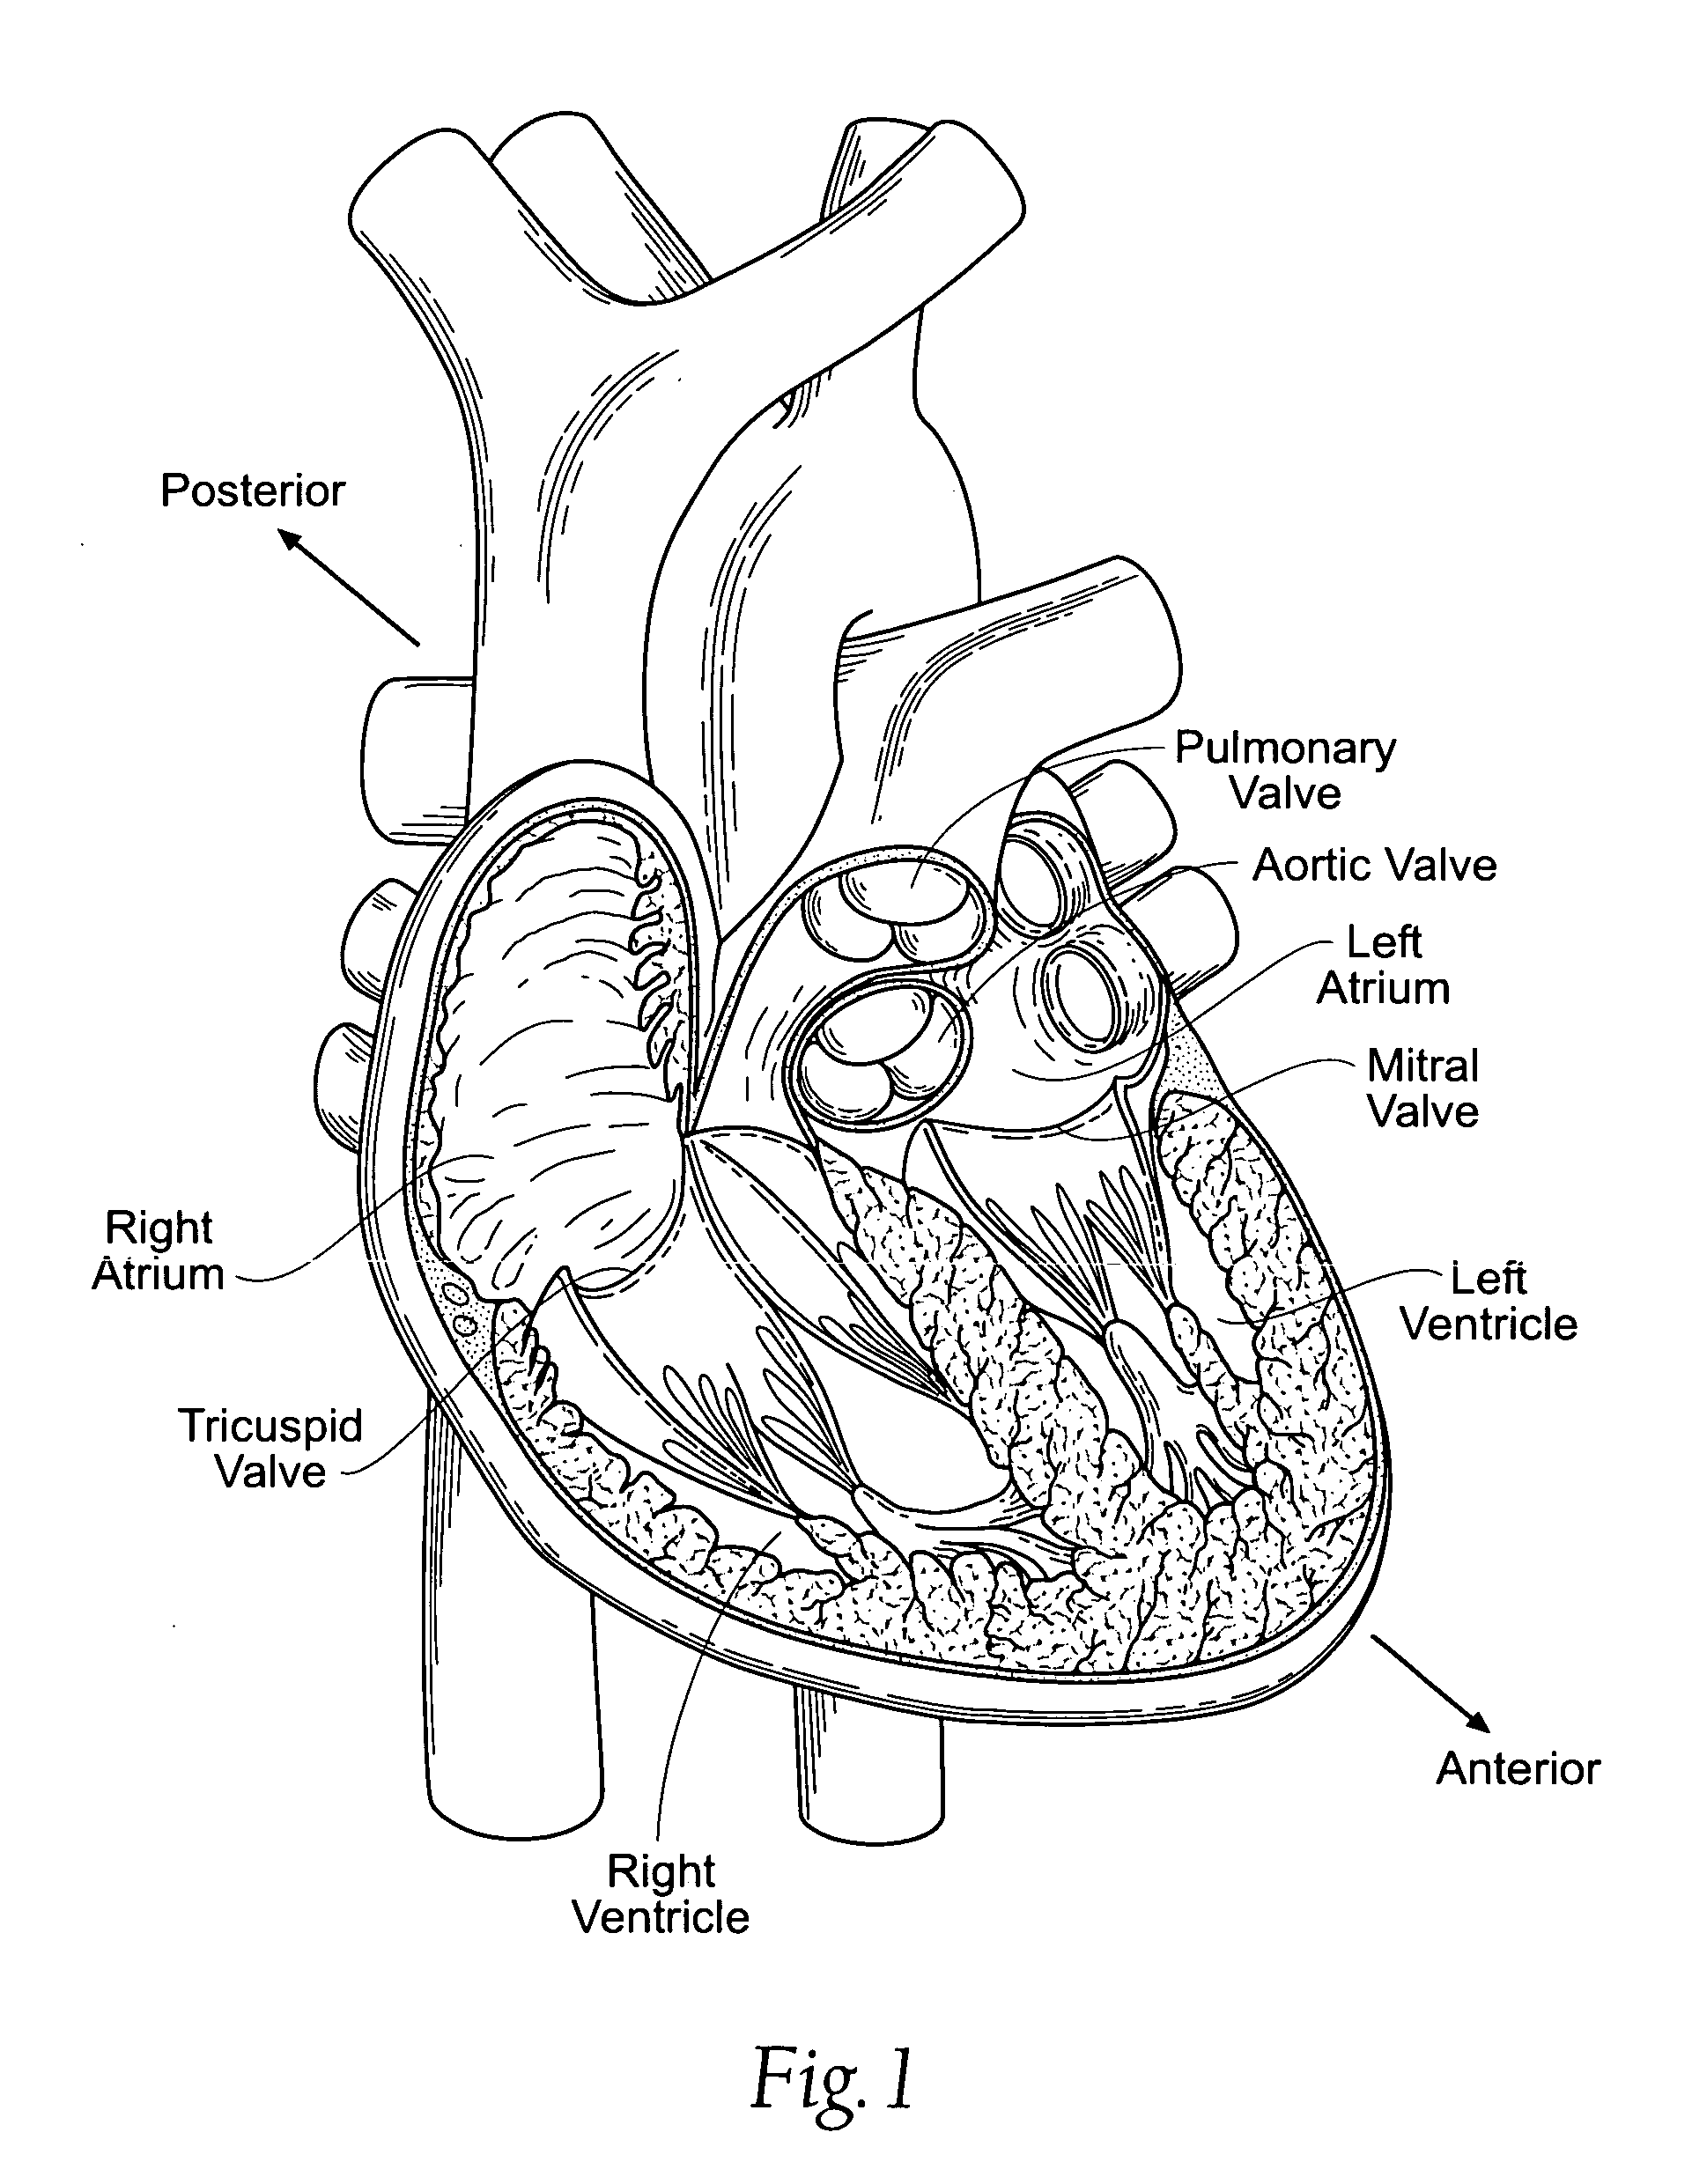 Devices, systems, and methods for reshaping a heart valve annulus, including the use of an adjustable bridge implant system